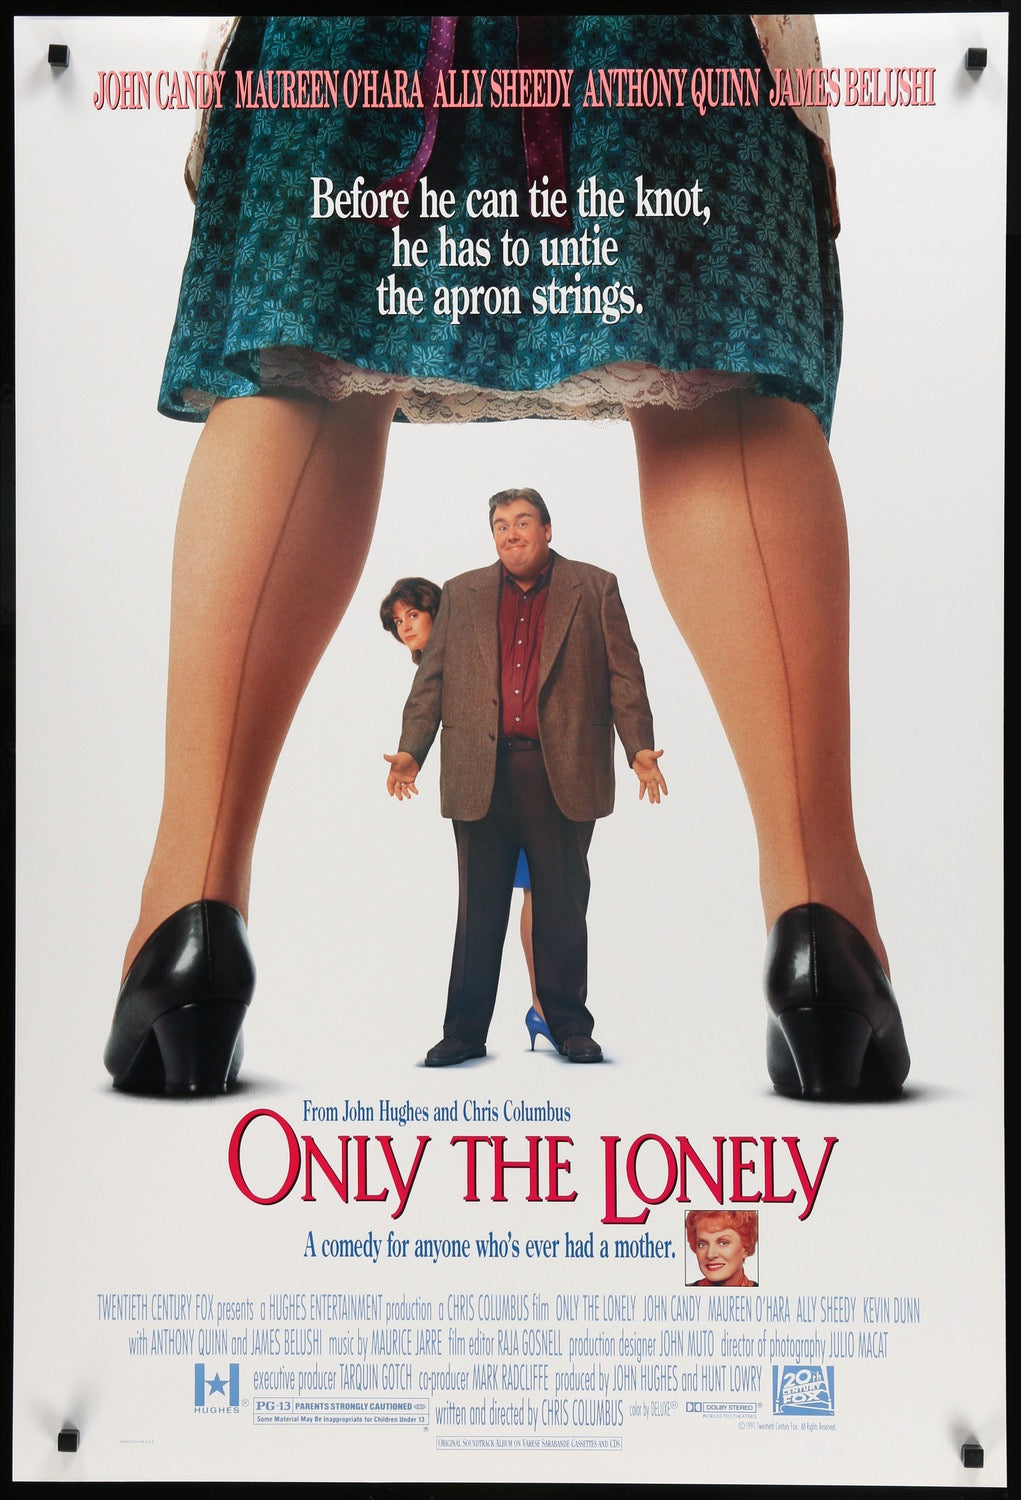 Only The Lonely (1991) original movie poster for sale at Original Film Art